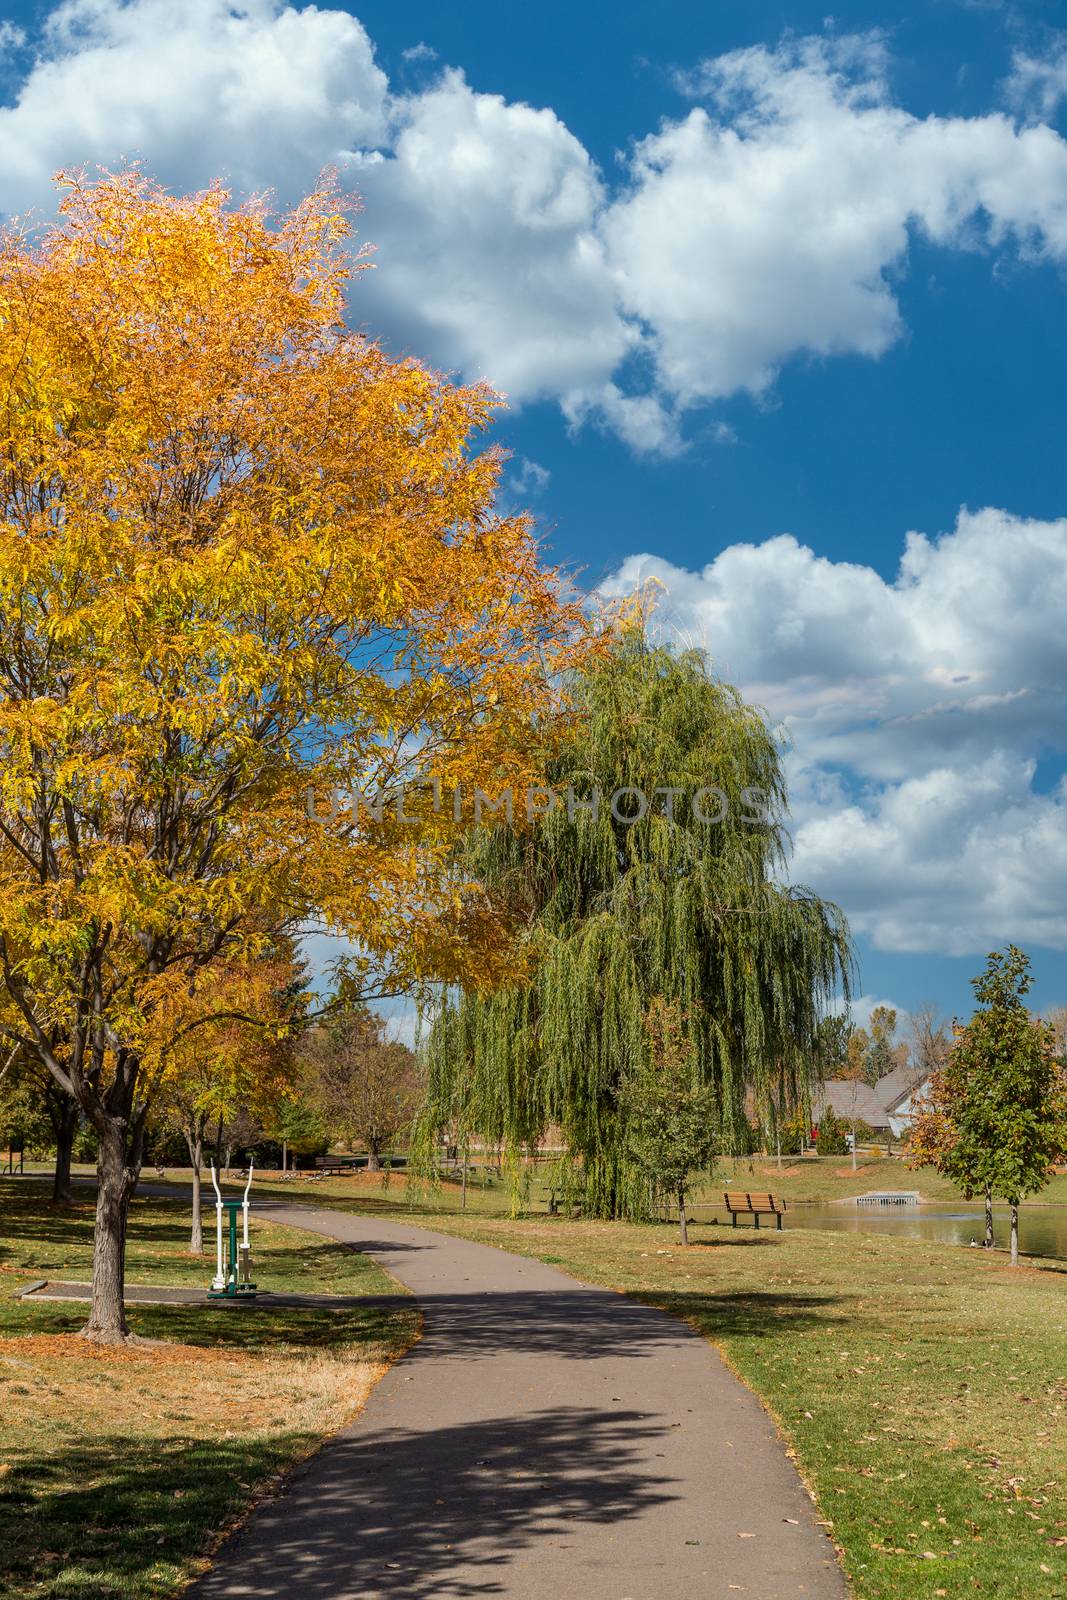 Park Pathway in Fall by dbvirago